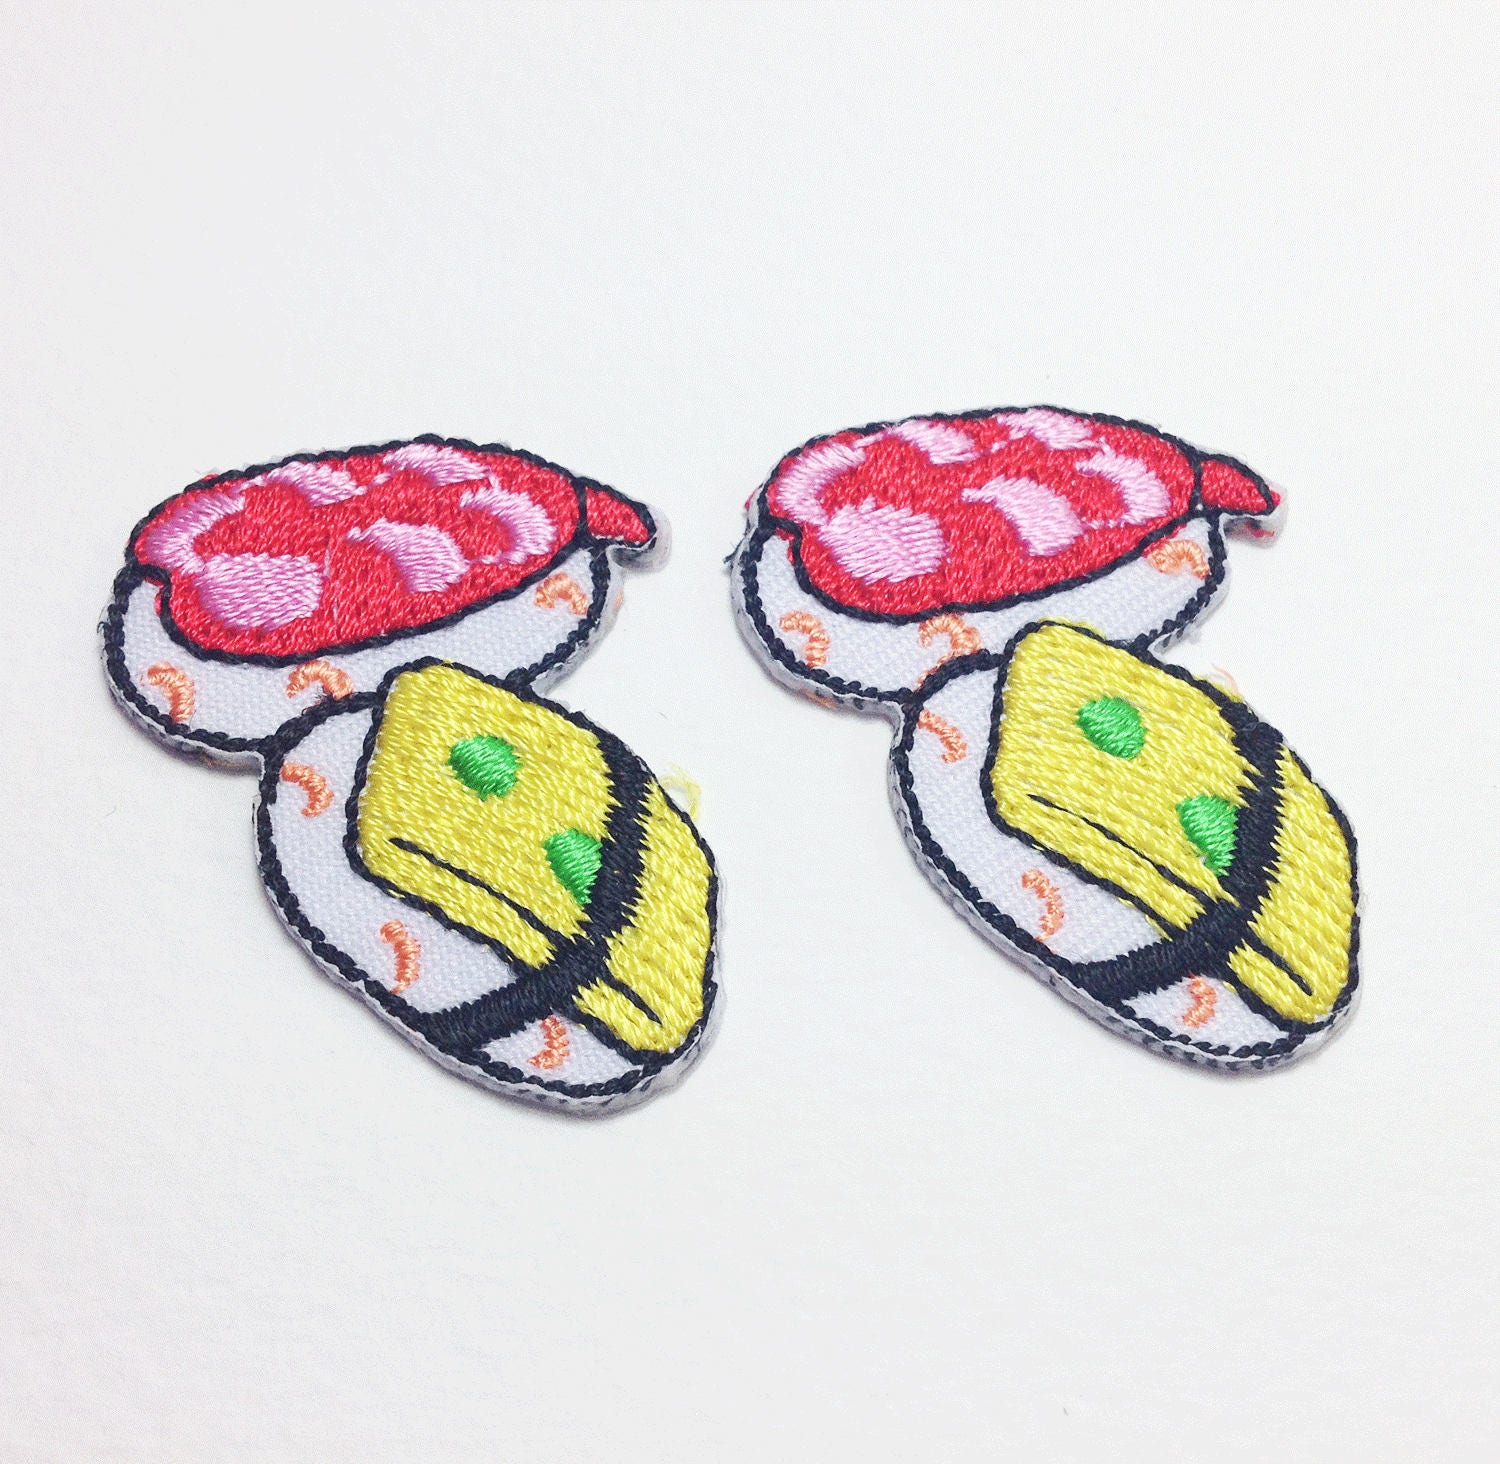 2 pieces Sushi patch Small sushi iron on patch from 